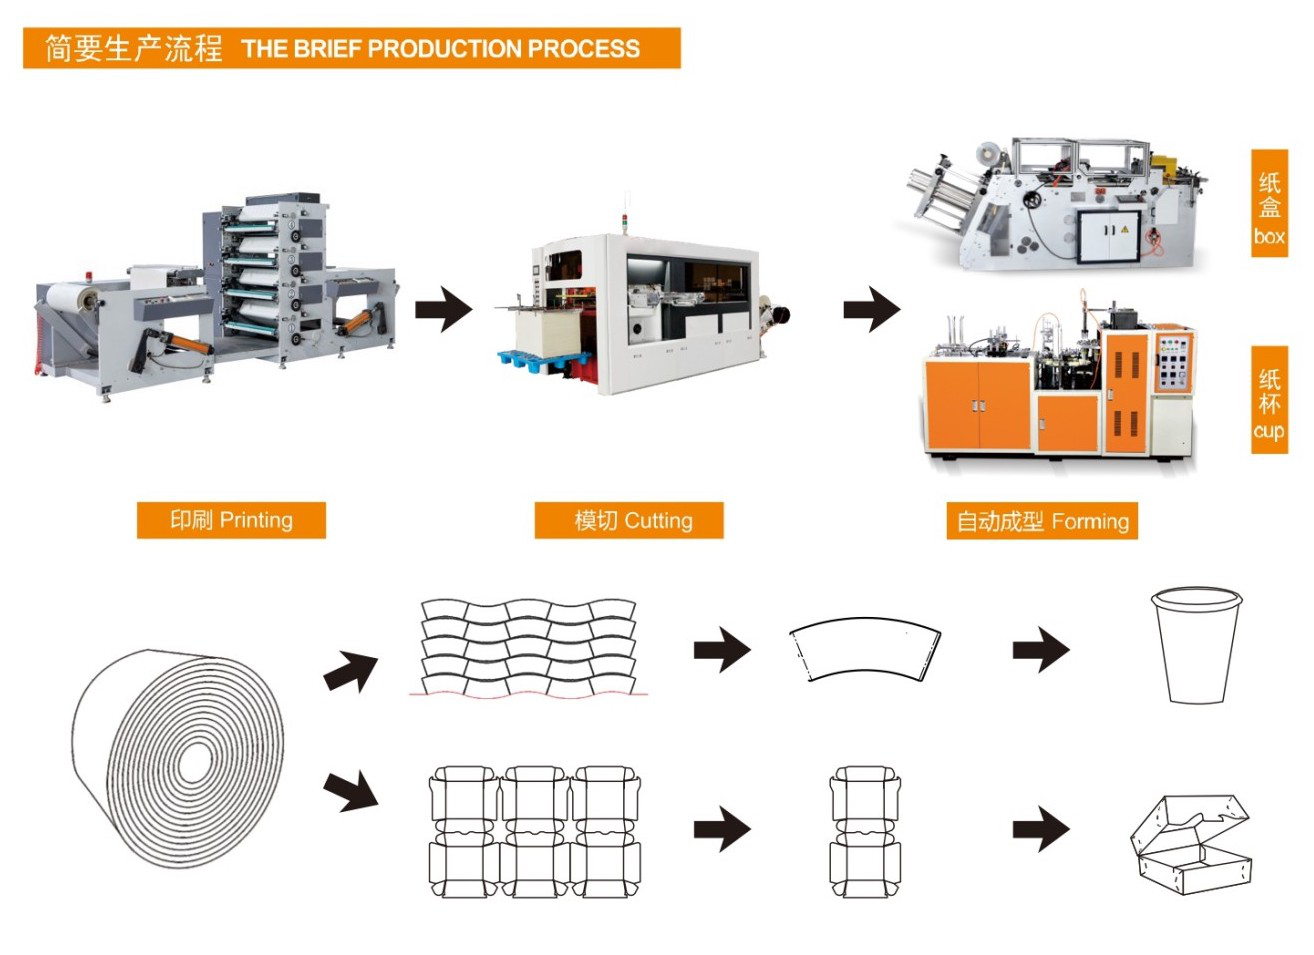 ®: Manufacture (Production) of Paper Cups & Supplier in